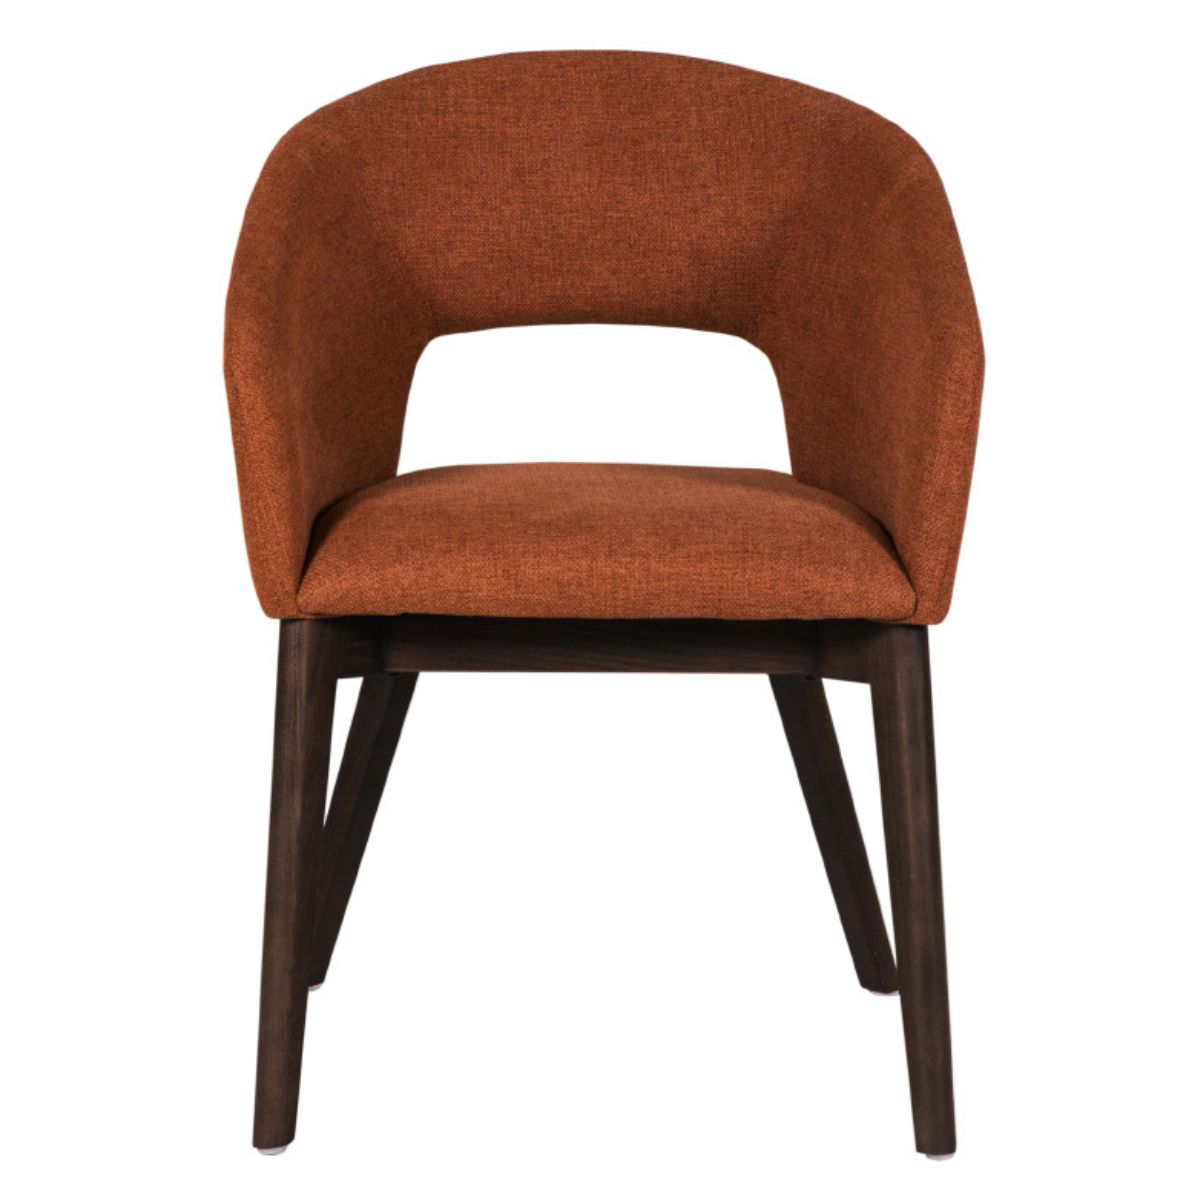 Aster Curved Back Dining Chair Orange - 2